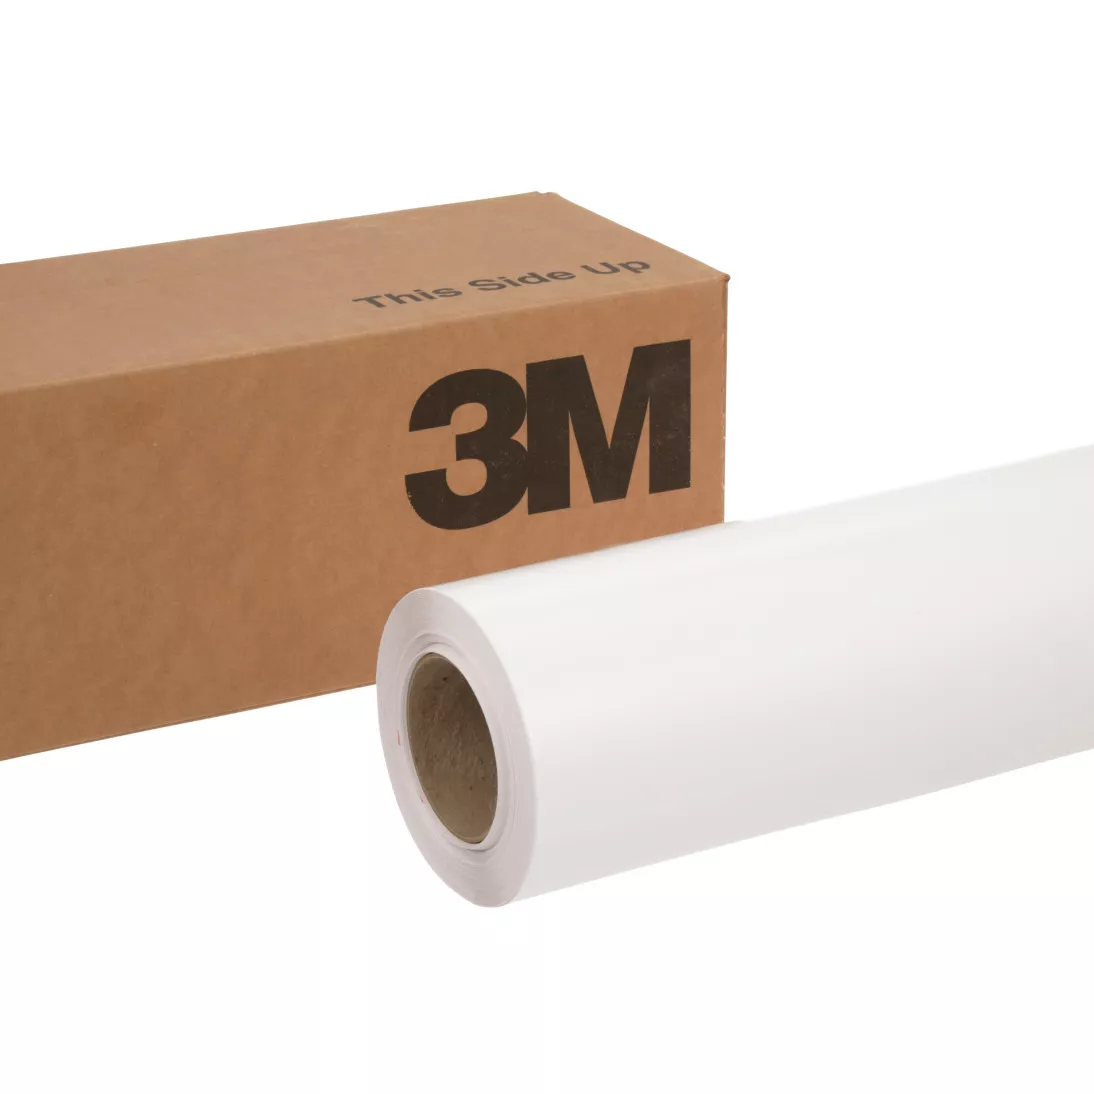 3M™ Envision™ Matte Wrap Overlaminate 8550M, 54 in x 100 yd